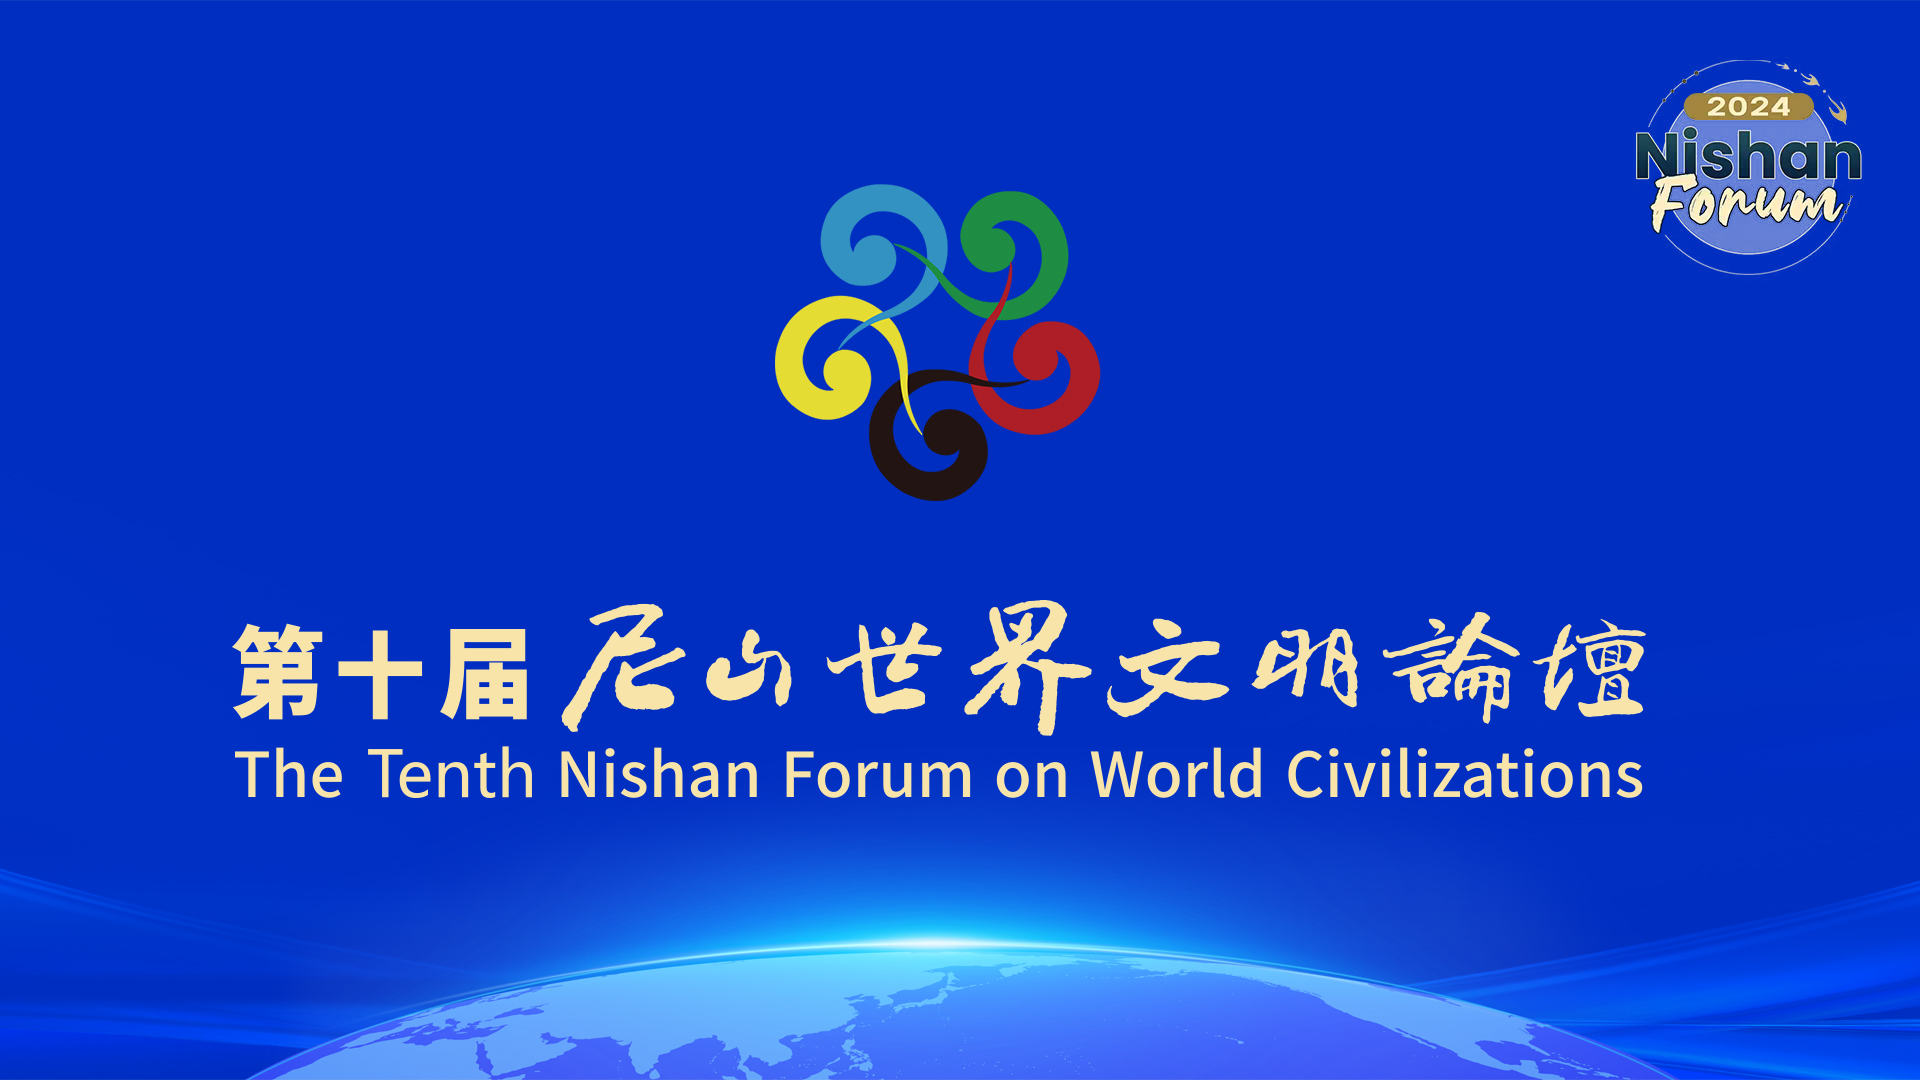 Live: Opening ceremony of Tenth Nishan Forum on World Civilizations